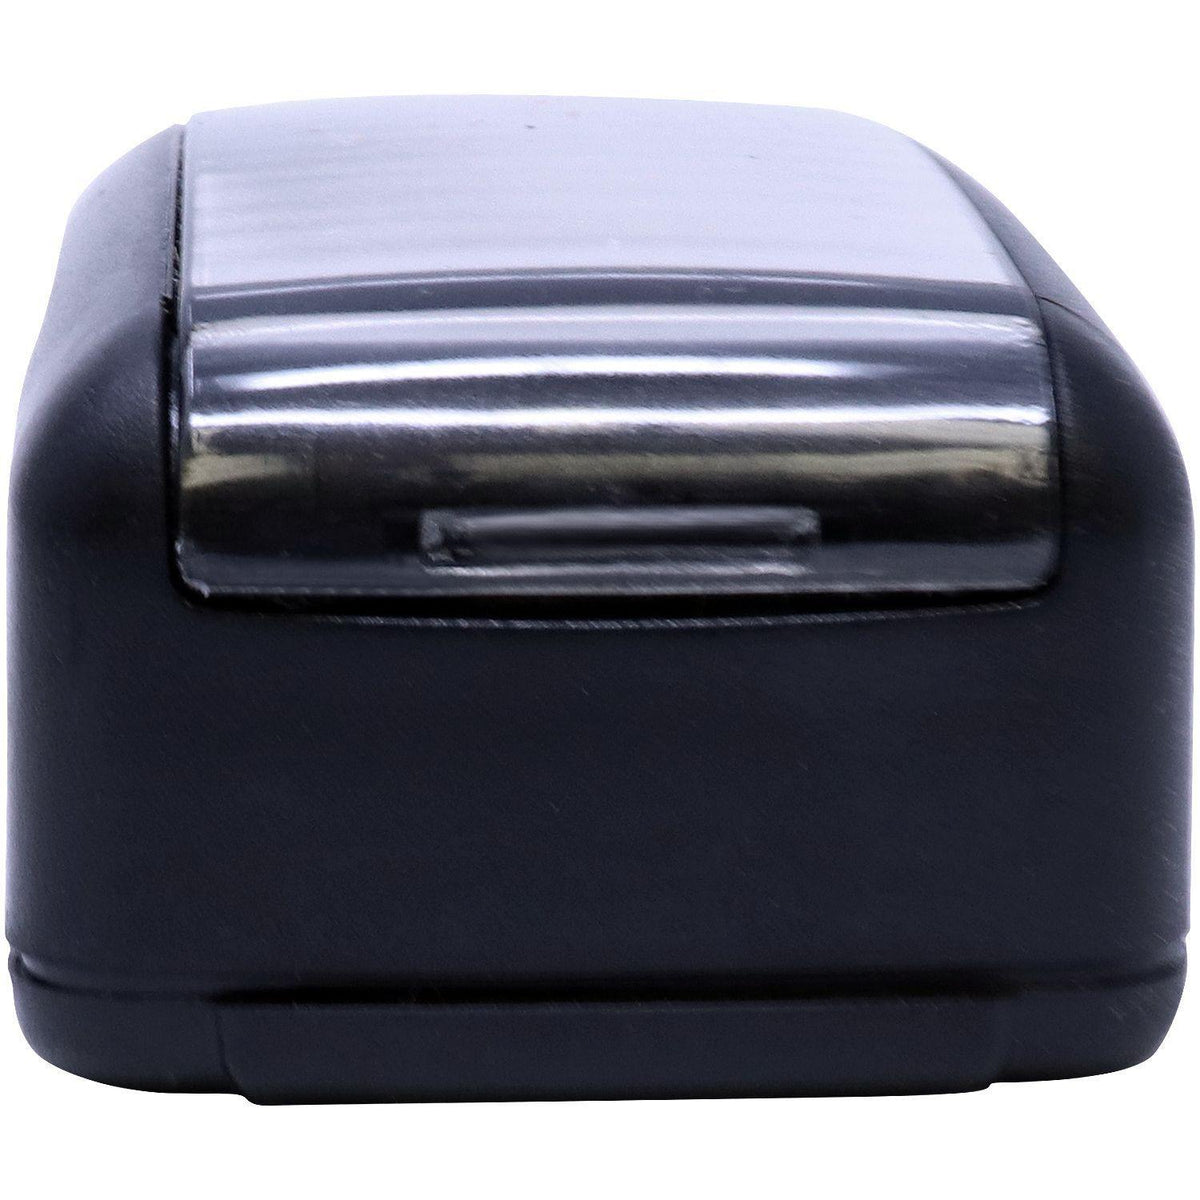 Large Pre-Inked Narrow Font First Class Mail Stamp Side View